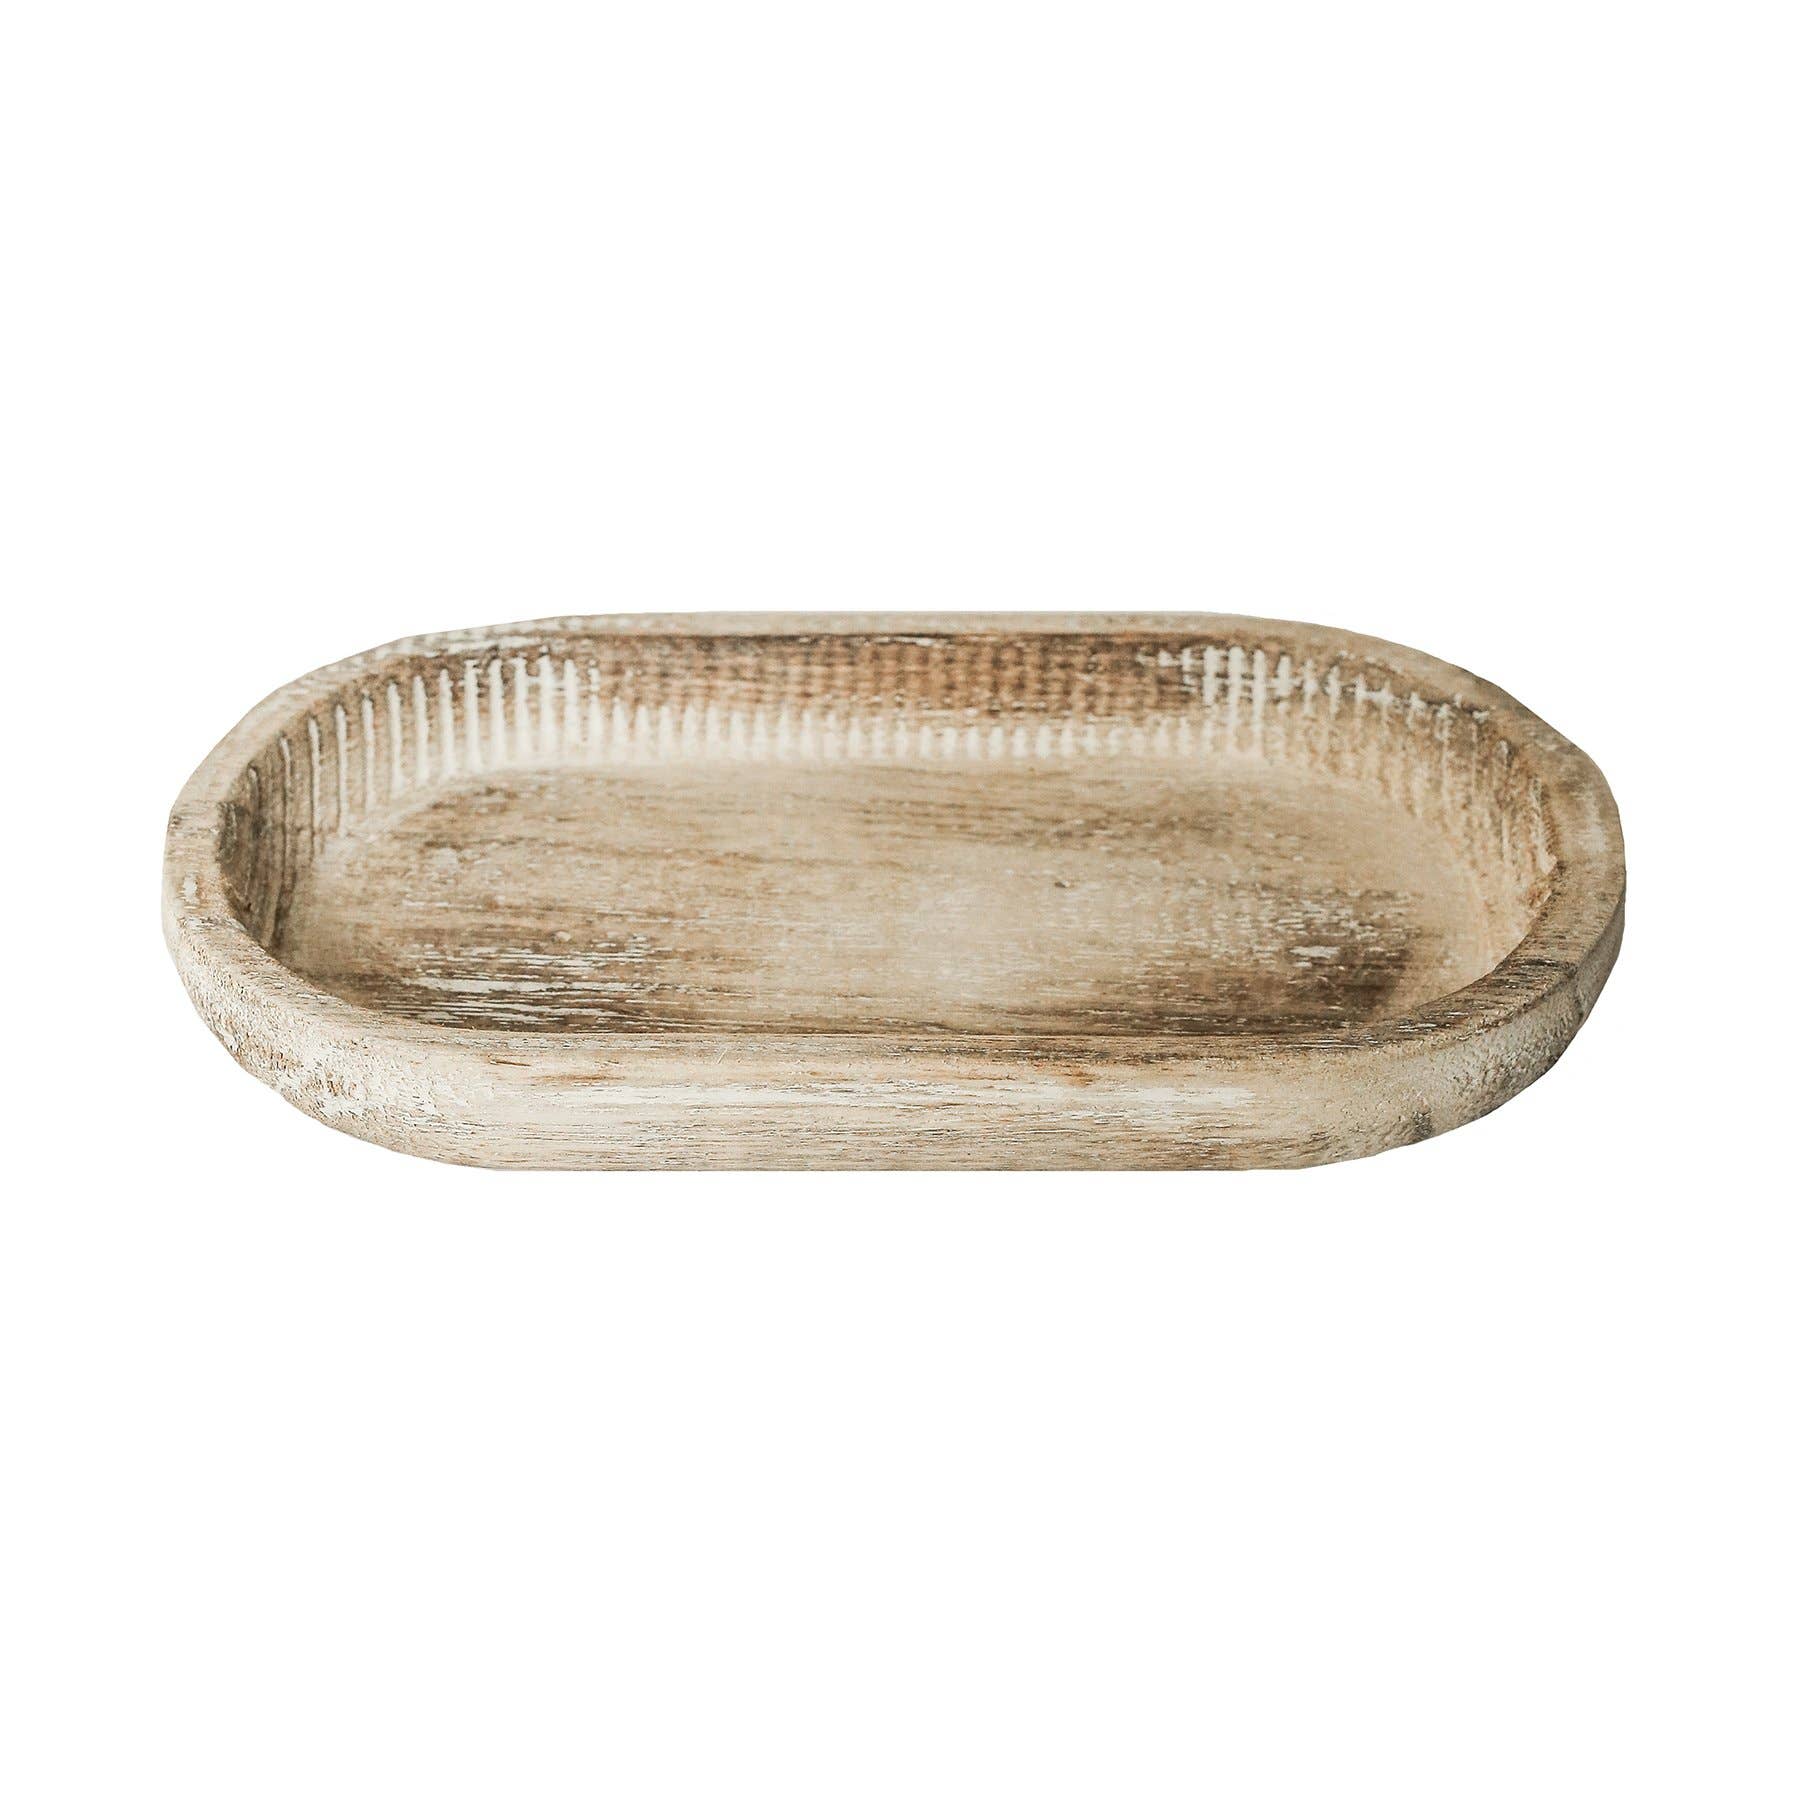 Rustic Small Wood Tray